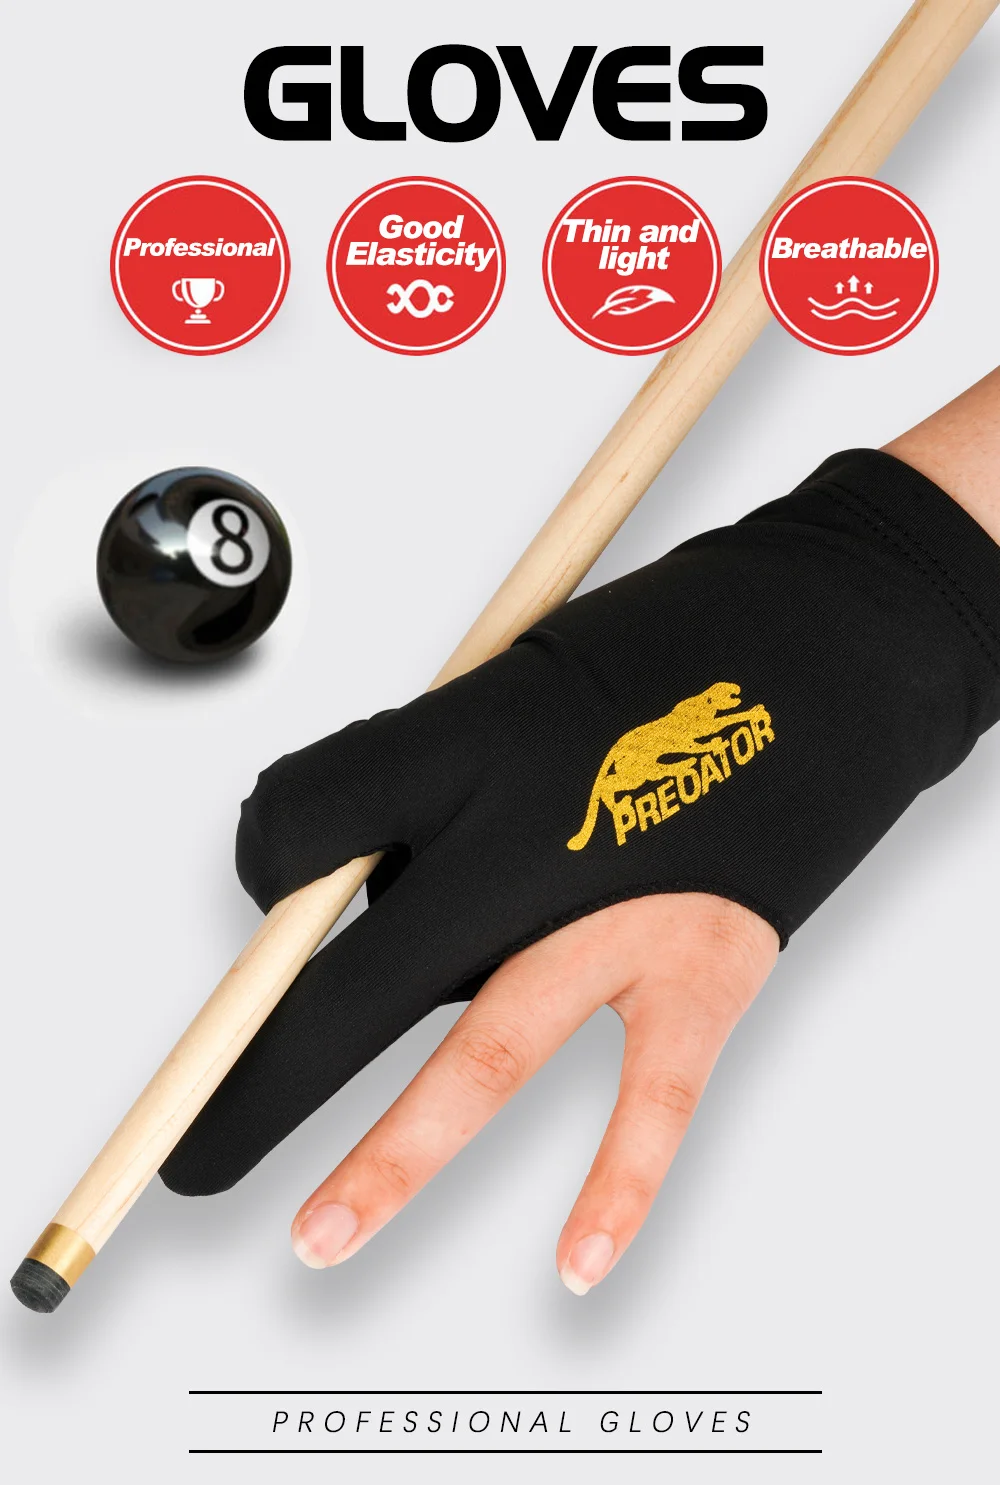 Quick-Dry Breathable Billiard Glove for Left Bridge Hand Professional 3 Fingers Lycra Stretchable Pool Cue Snooker Glove Snooker Carom Billiard Pool Cue Sport Glove Handwear Gift for Men Women Player